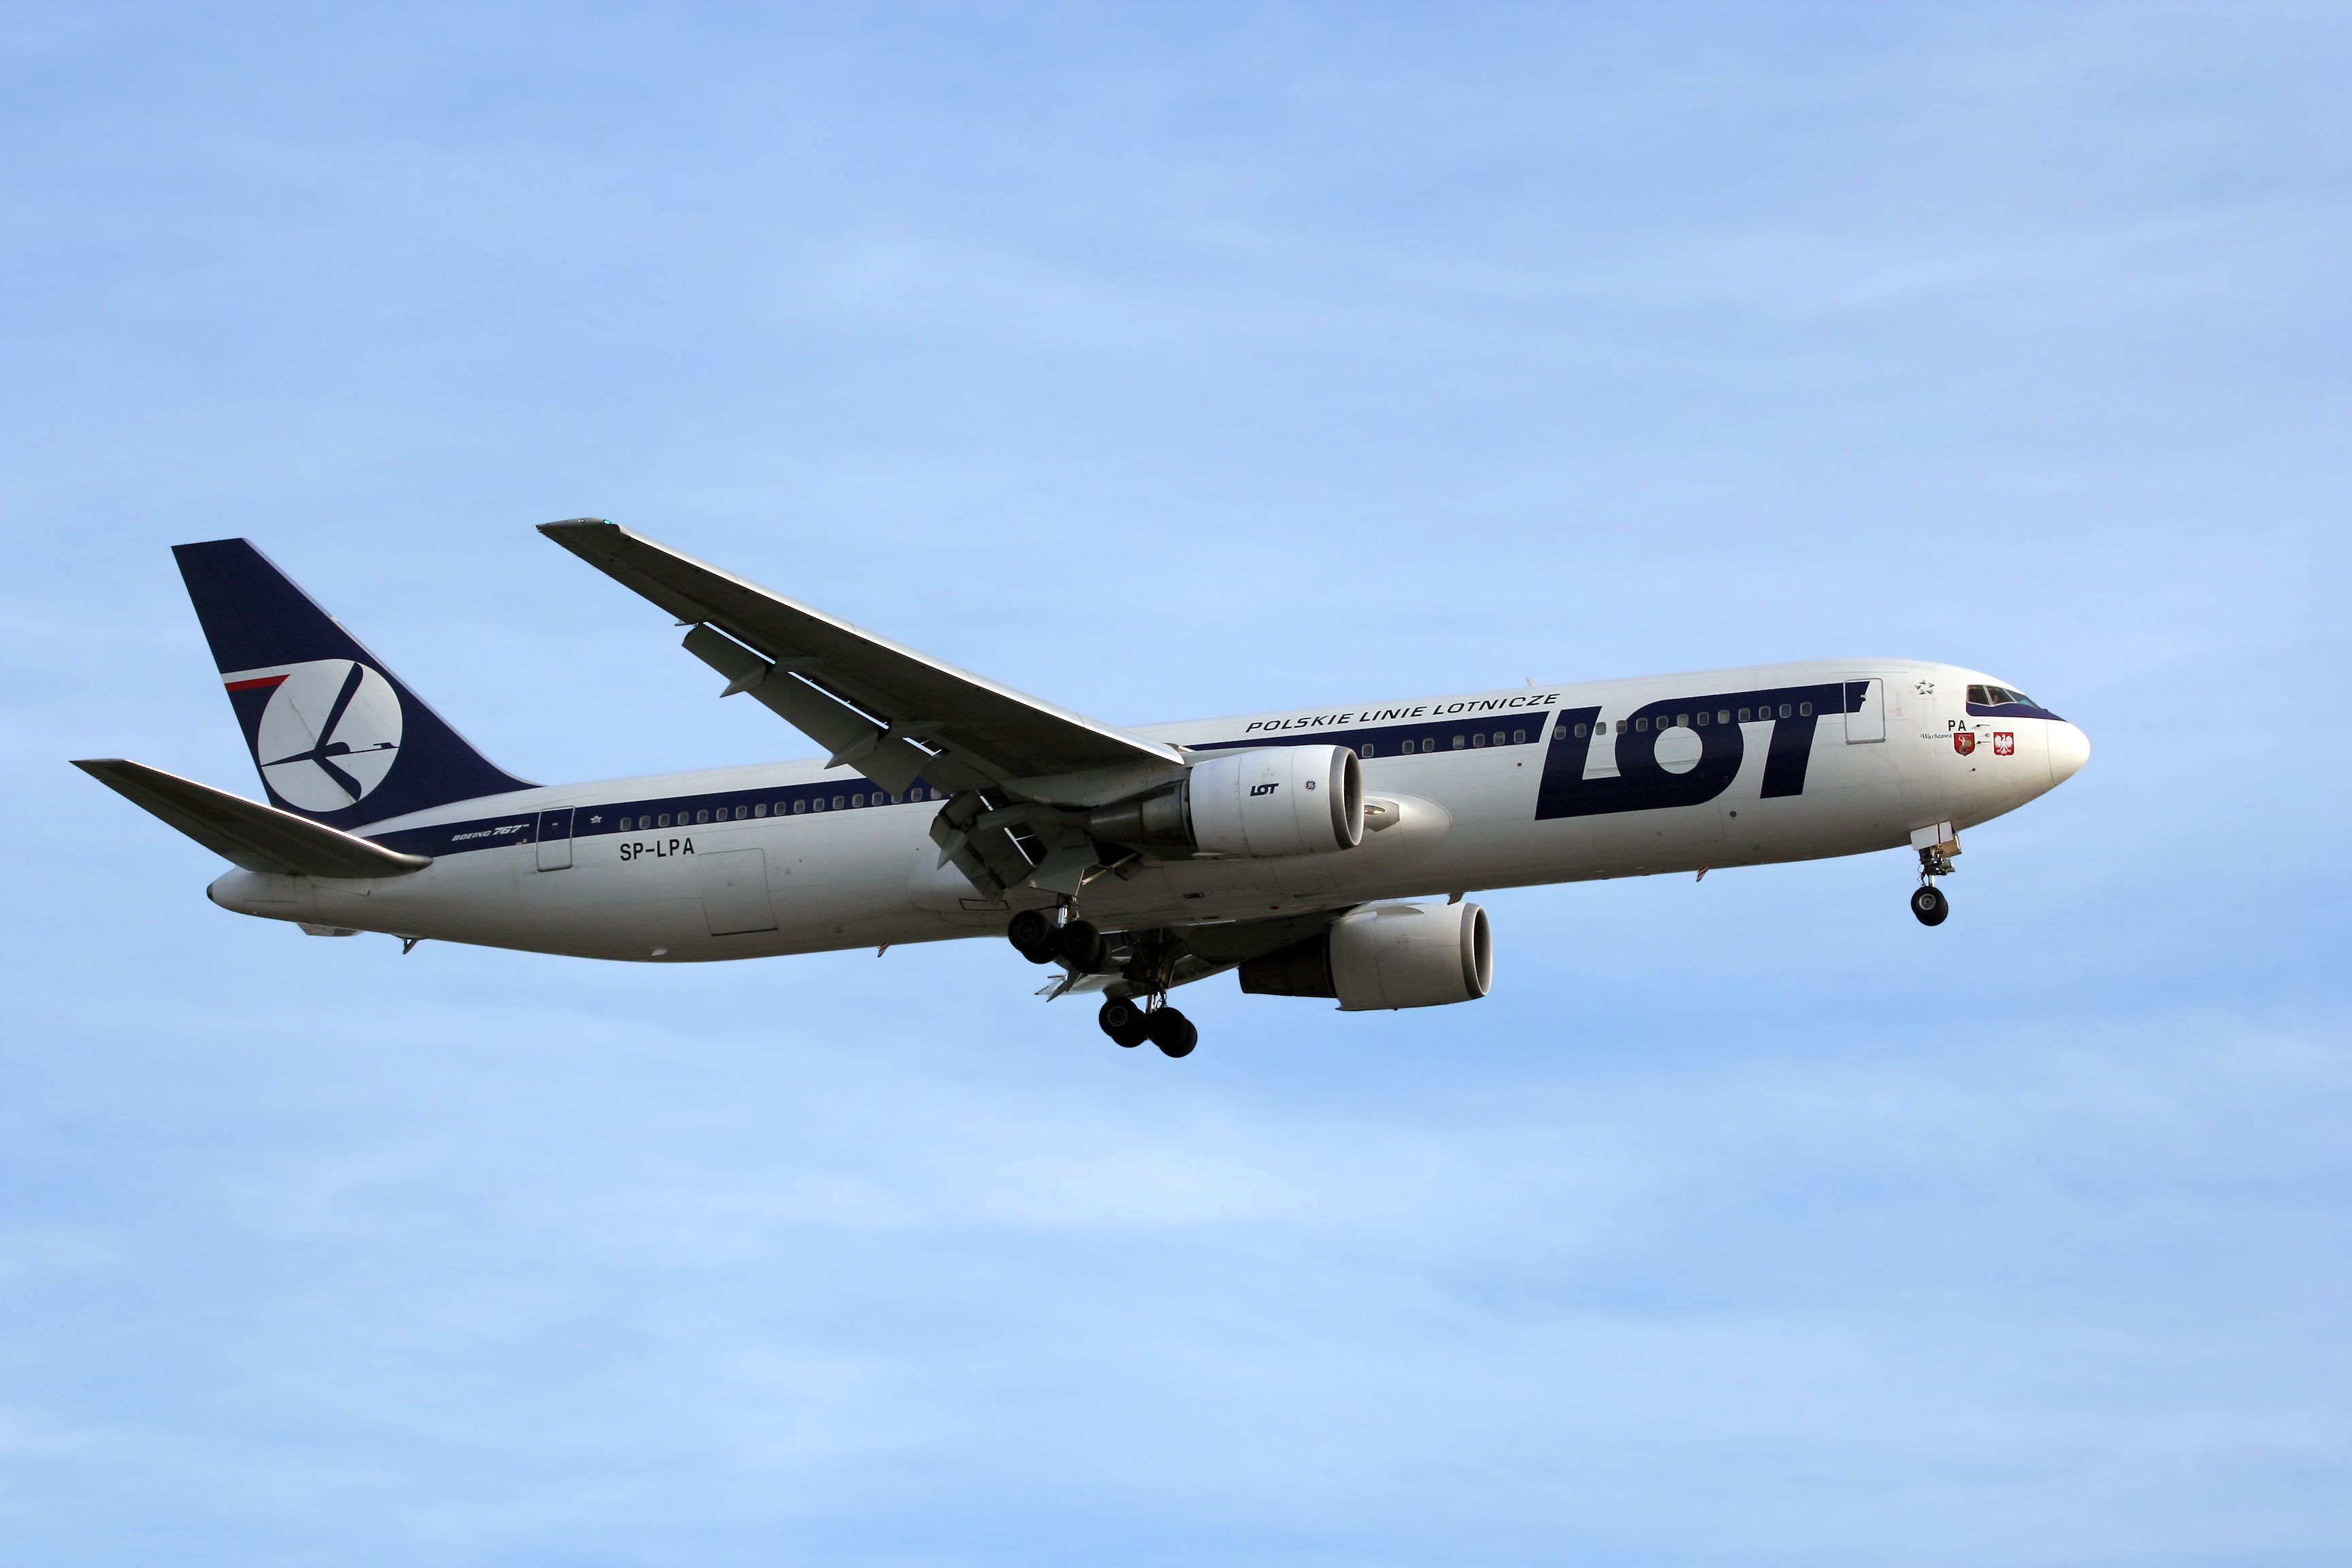 LOT Polish Airlines Boeing 767 Inflight